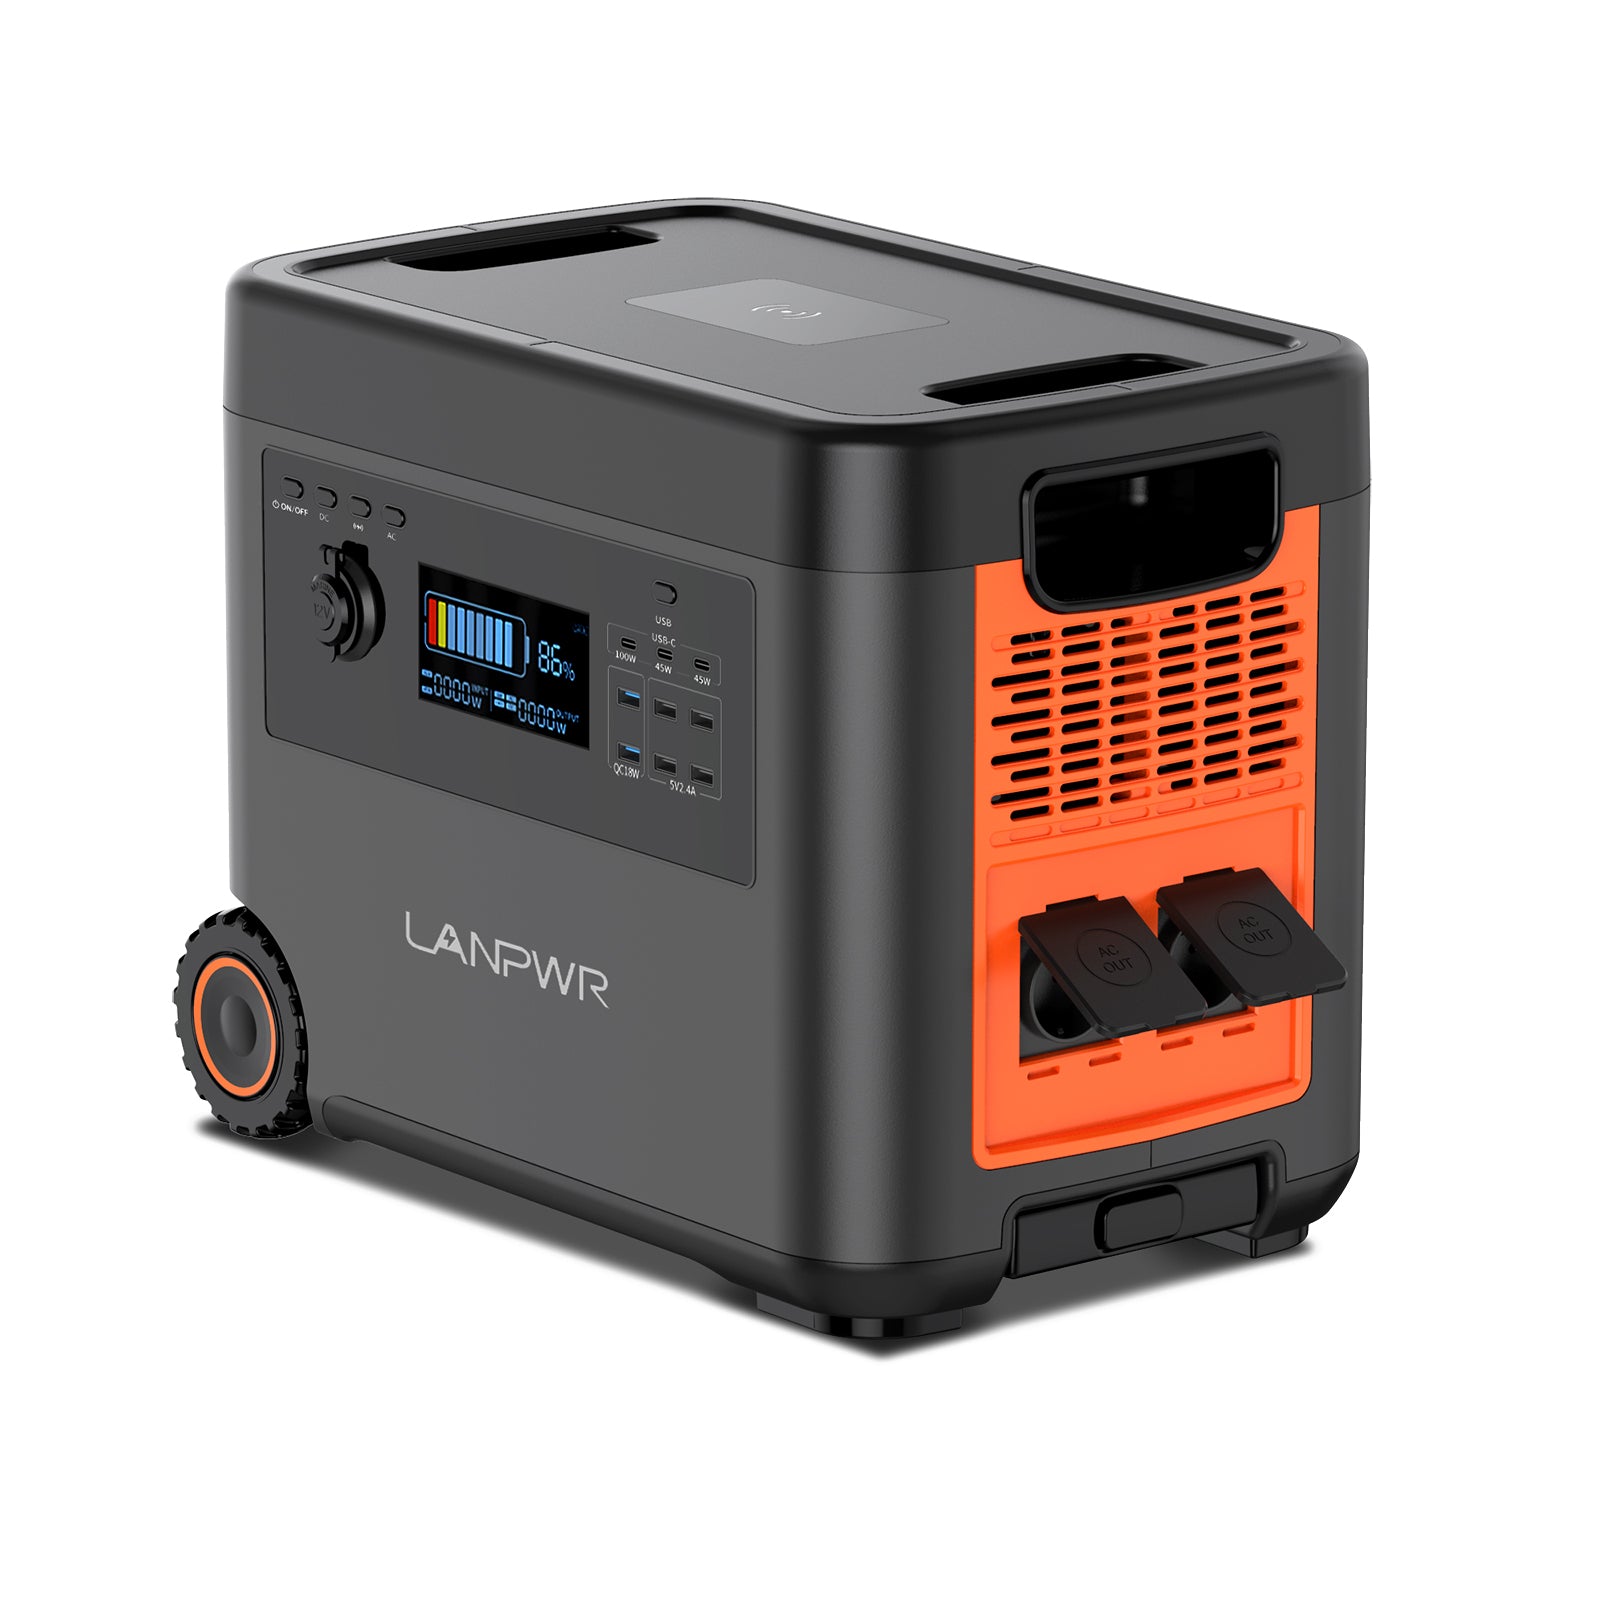 LANPWR D5-2500 Portable Power Station Solar Generator 2160Wh 2500W Perfect for Outdoor camping, RV trip, Outdoor party, Home use